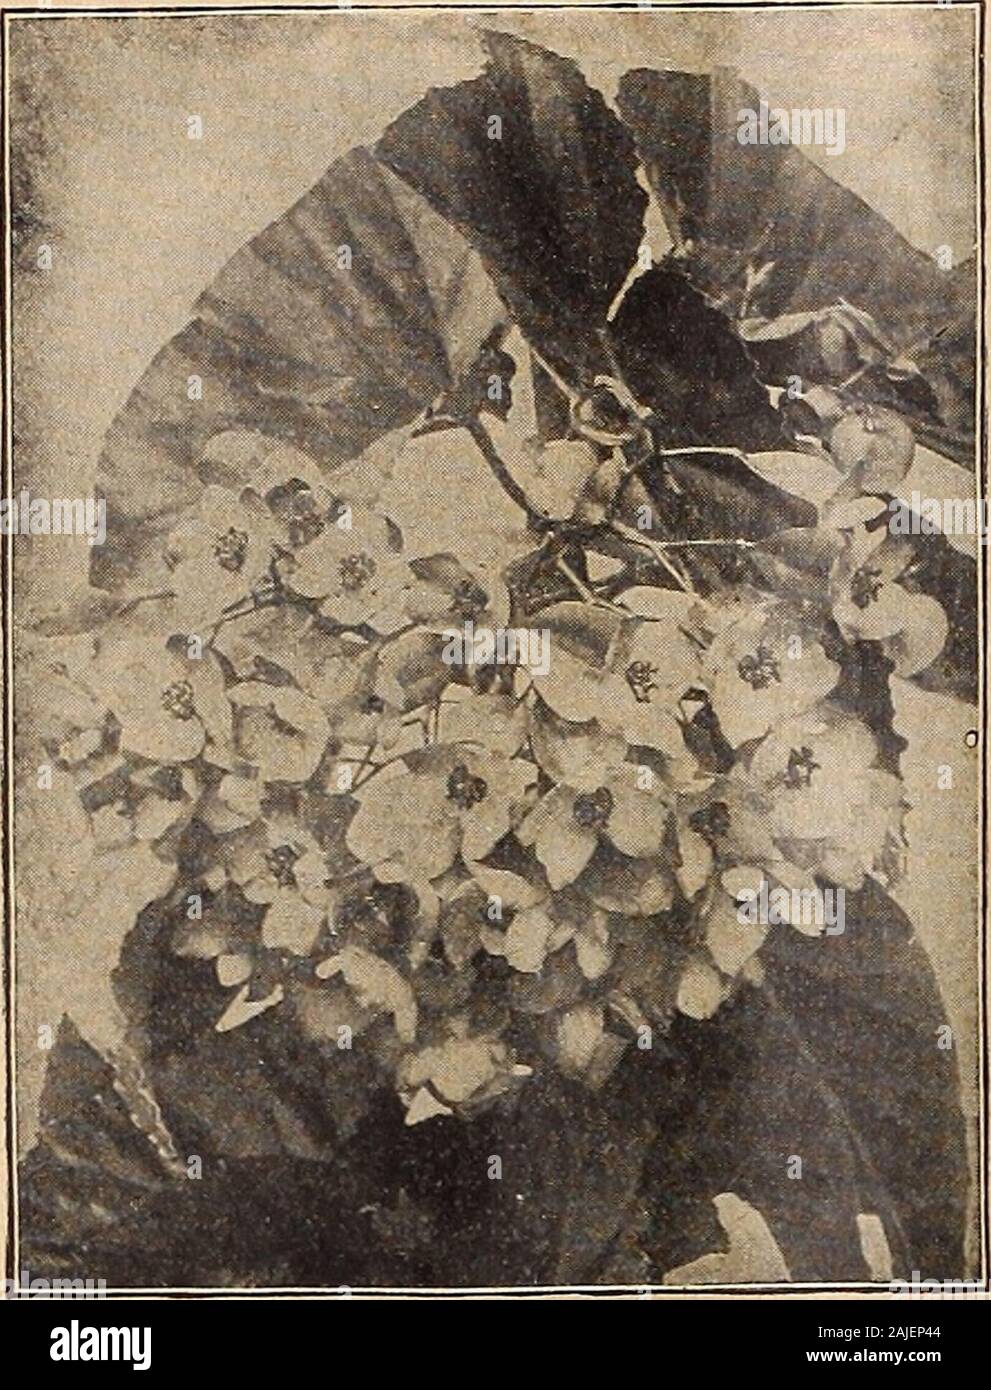 Dreer's autumn catalogue 1918 . Begonia Corallina Lucerna FIBROUS-ROOXBD B£G0:NIAS This class is among the freest flowering ornamental-leavedpot plants for conservatory decoration; excellent subjects for thewindow garden. Alba Picta. Leaves glossy green, freely spotted with silvery-white; flowers white. Argentea Guttata. Foliage of rich green, spotted with silver. Corallina Lucerna. Gigantic trusses of bronzy-red flowers in bloomcontinuously from April to November. liaageana. Large trusses of creamy-white flowers, suffused with pink,the foliage is bold and attractive, of a bronzy-green above a Stock Photo